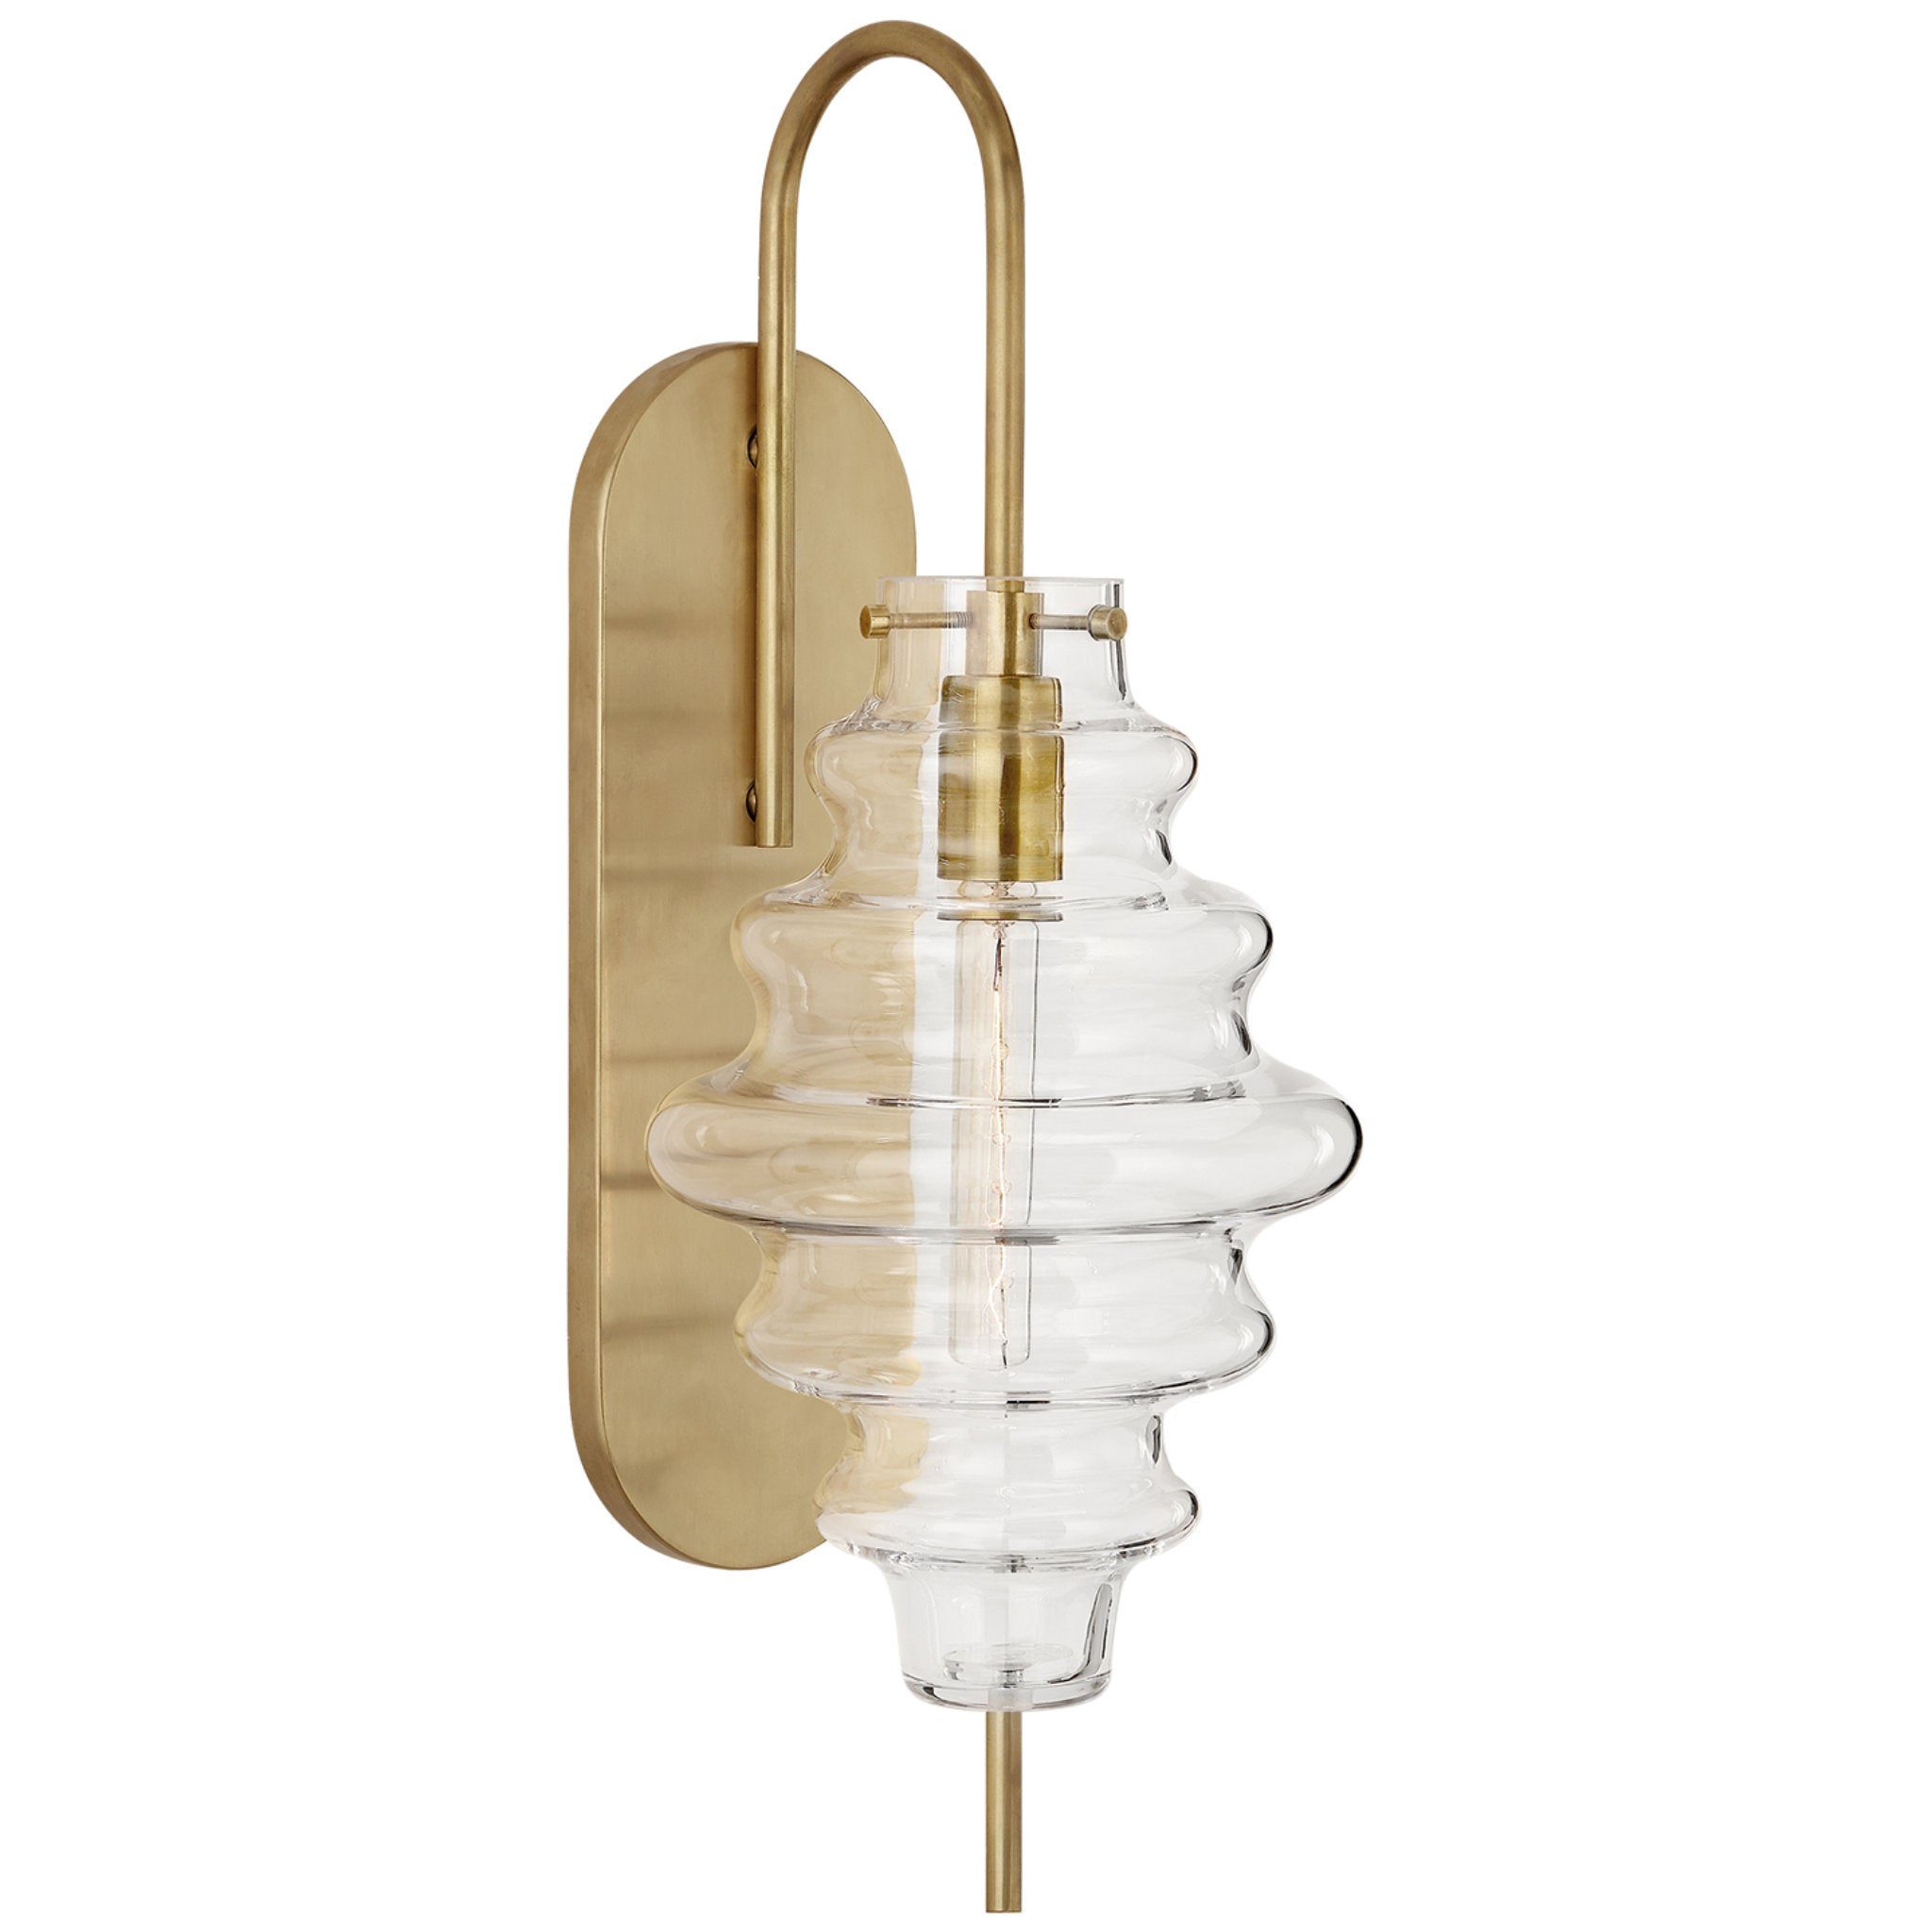 Kelly Wearstler Tableau Large Sconce in Antique-Burnished Brass with Clear Glass